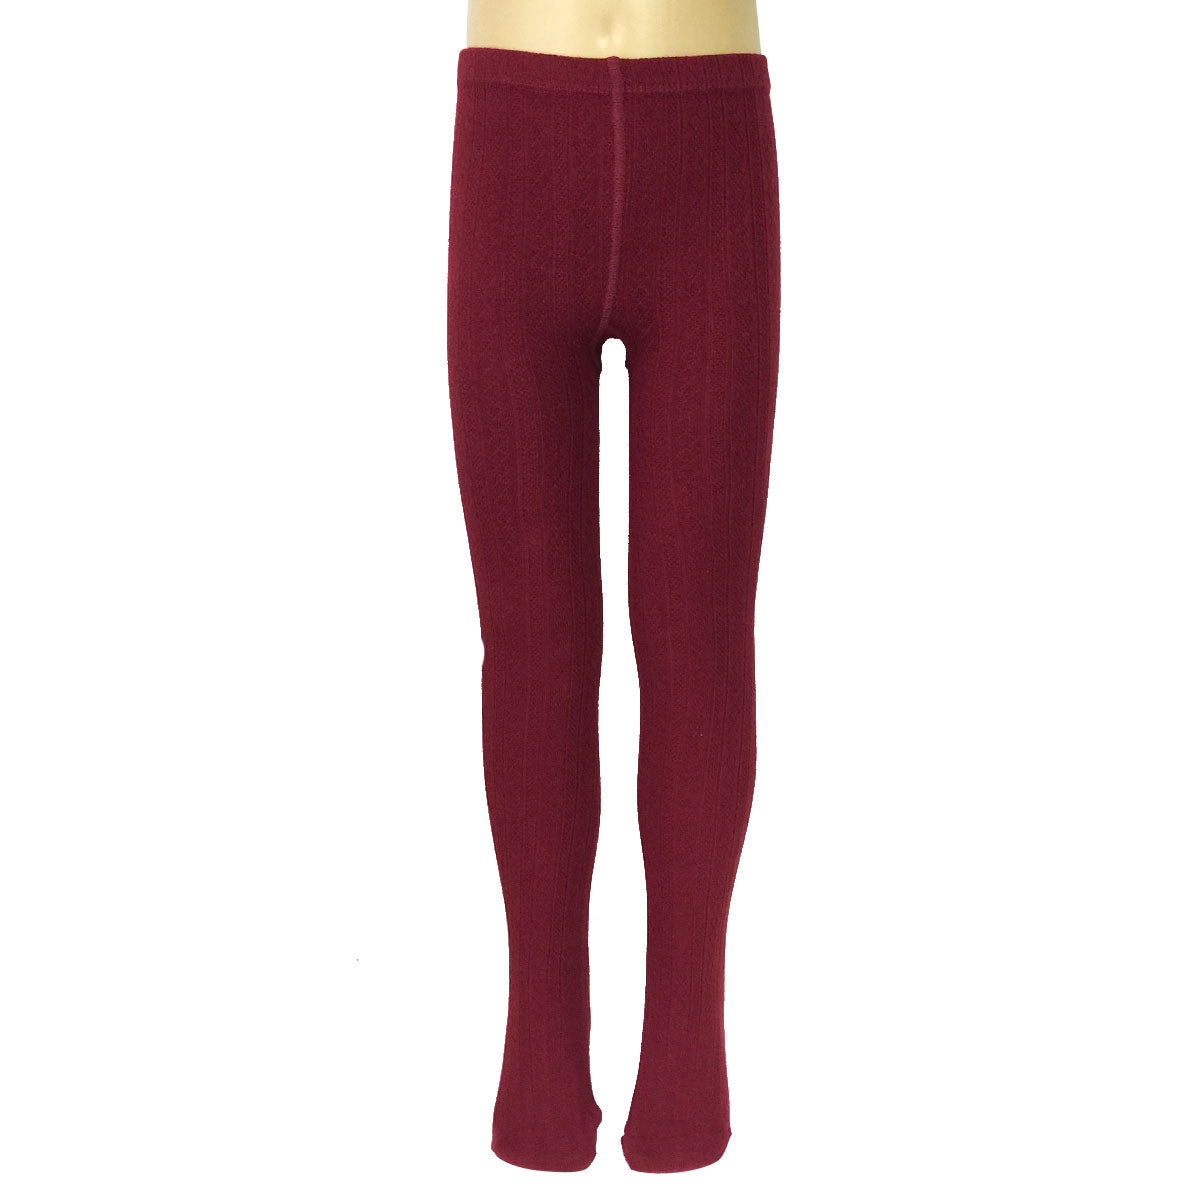 Wrapables Burgundy and Gray Cotton Diamond Weave Knit Tights for Girls